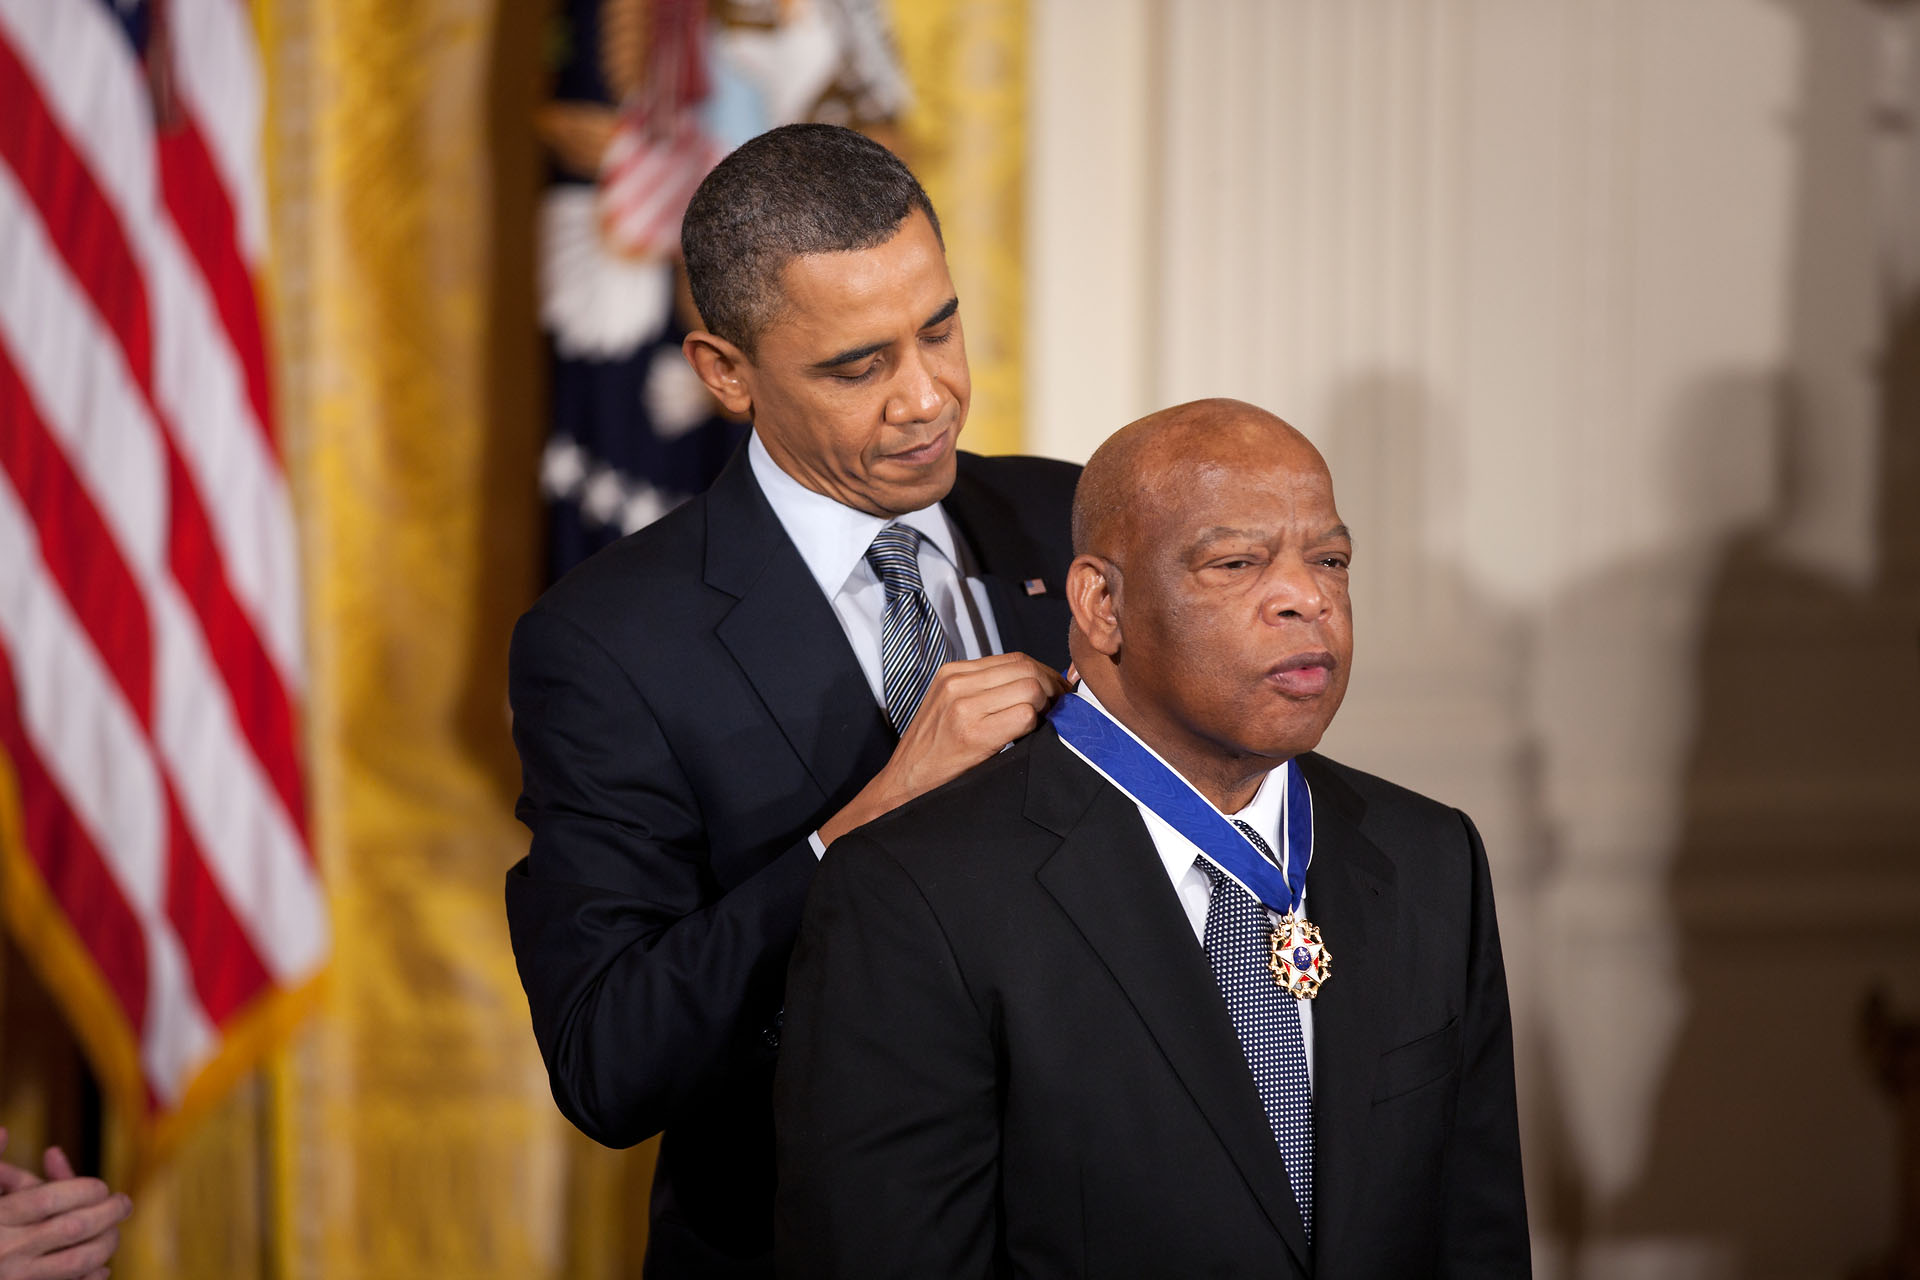 Honor the legacy of Congressman John Lewis by urging the Senate to vote on the Voting Rights Advancement Act